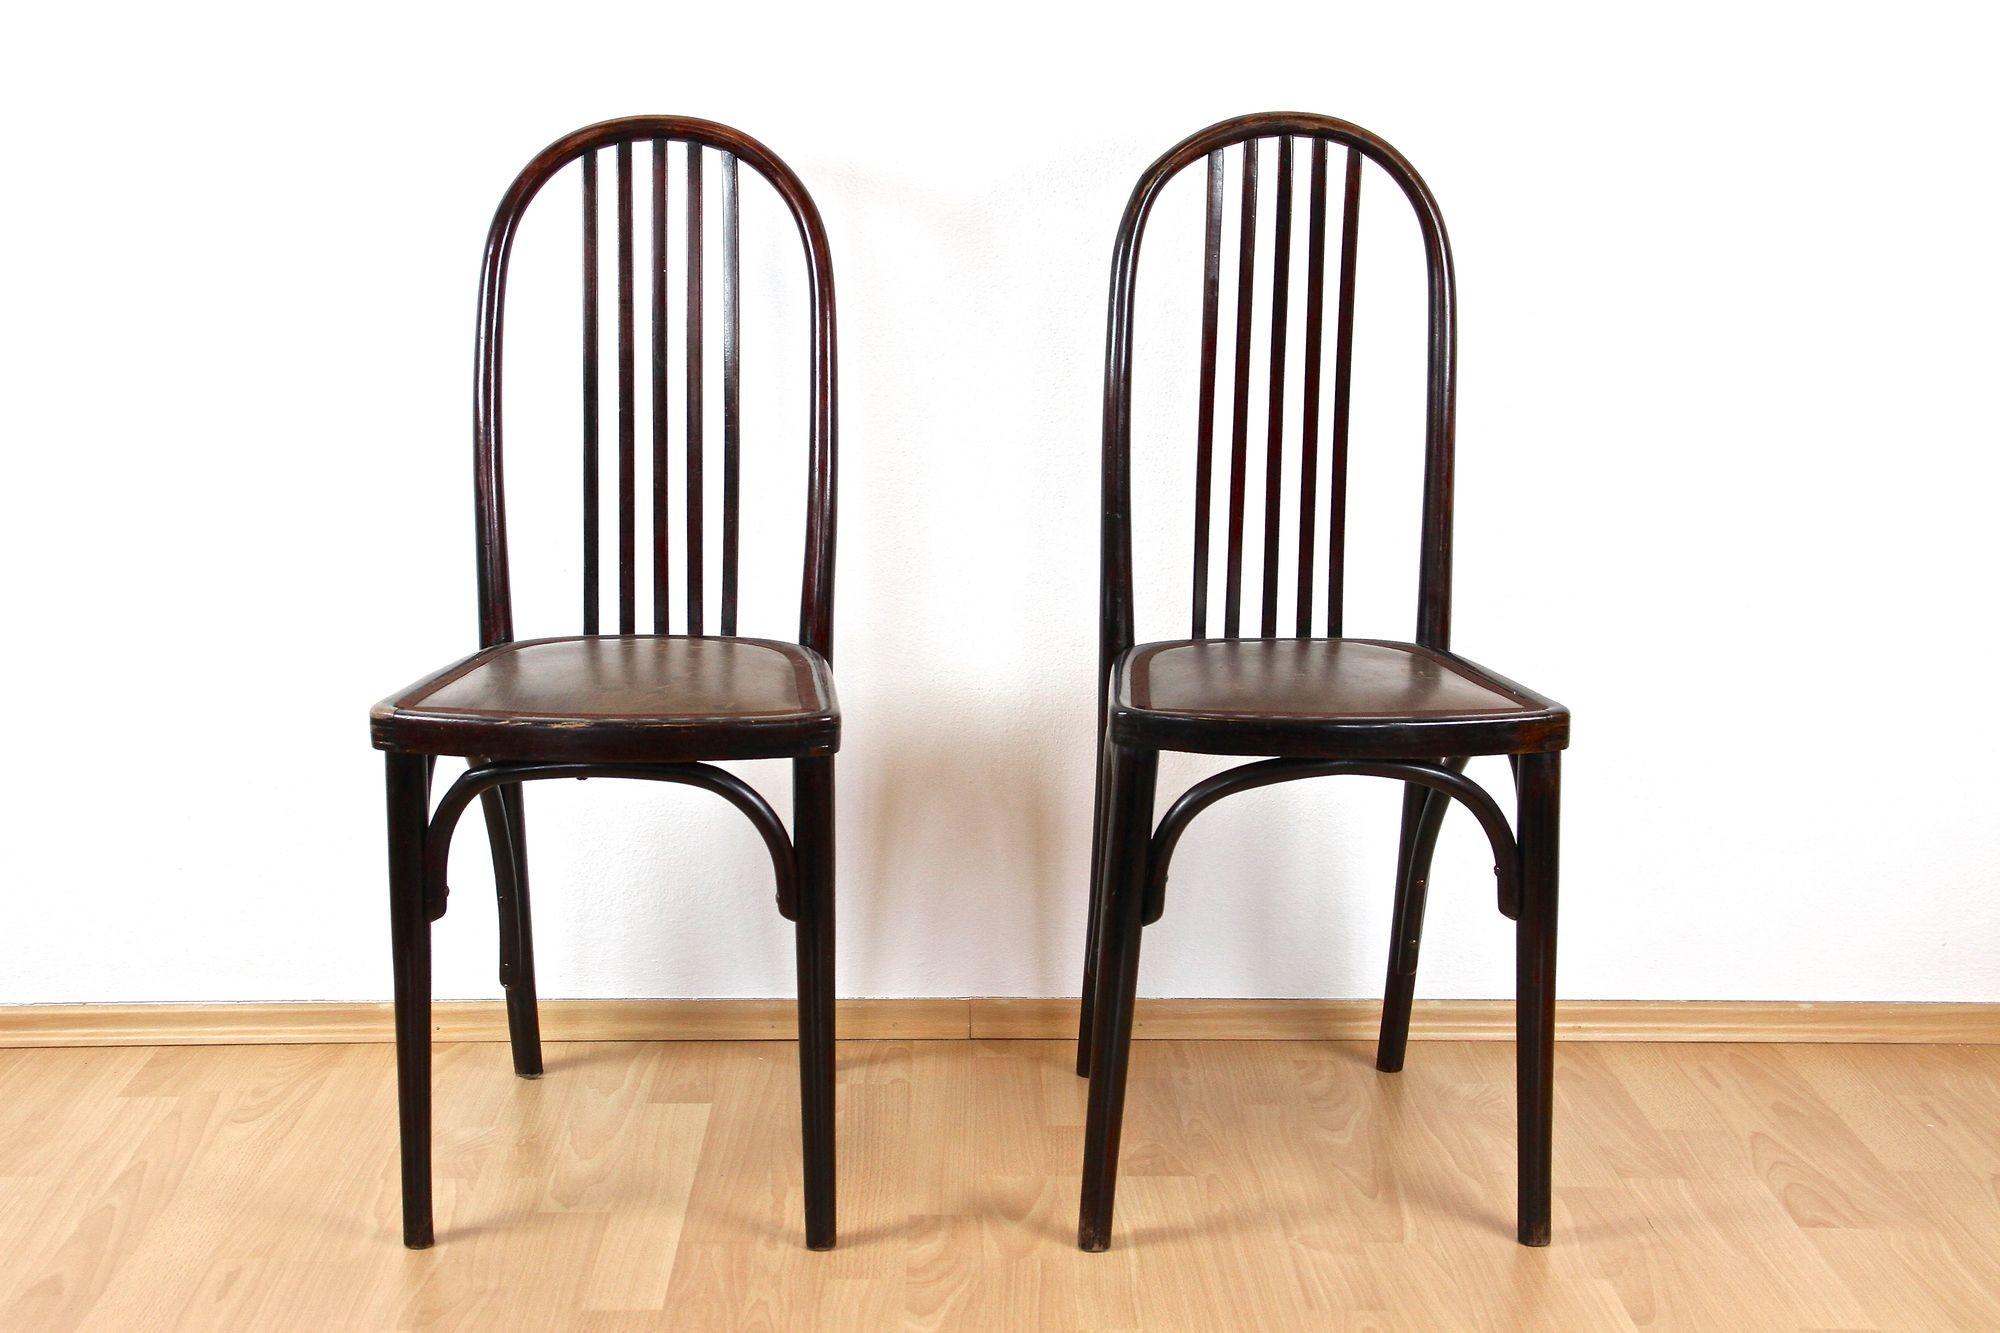 Very rare pair of the first edition(!) of bentwood chairs by Thonet from the early 20th century, produced by Thonet in Bohemia. Designed around 1906 by none other than the world renowed Austrian architect and founder of the 